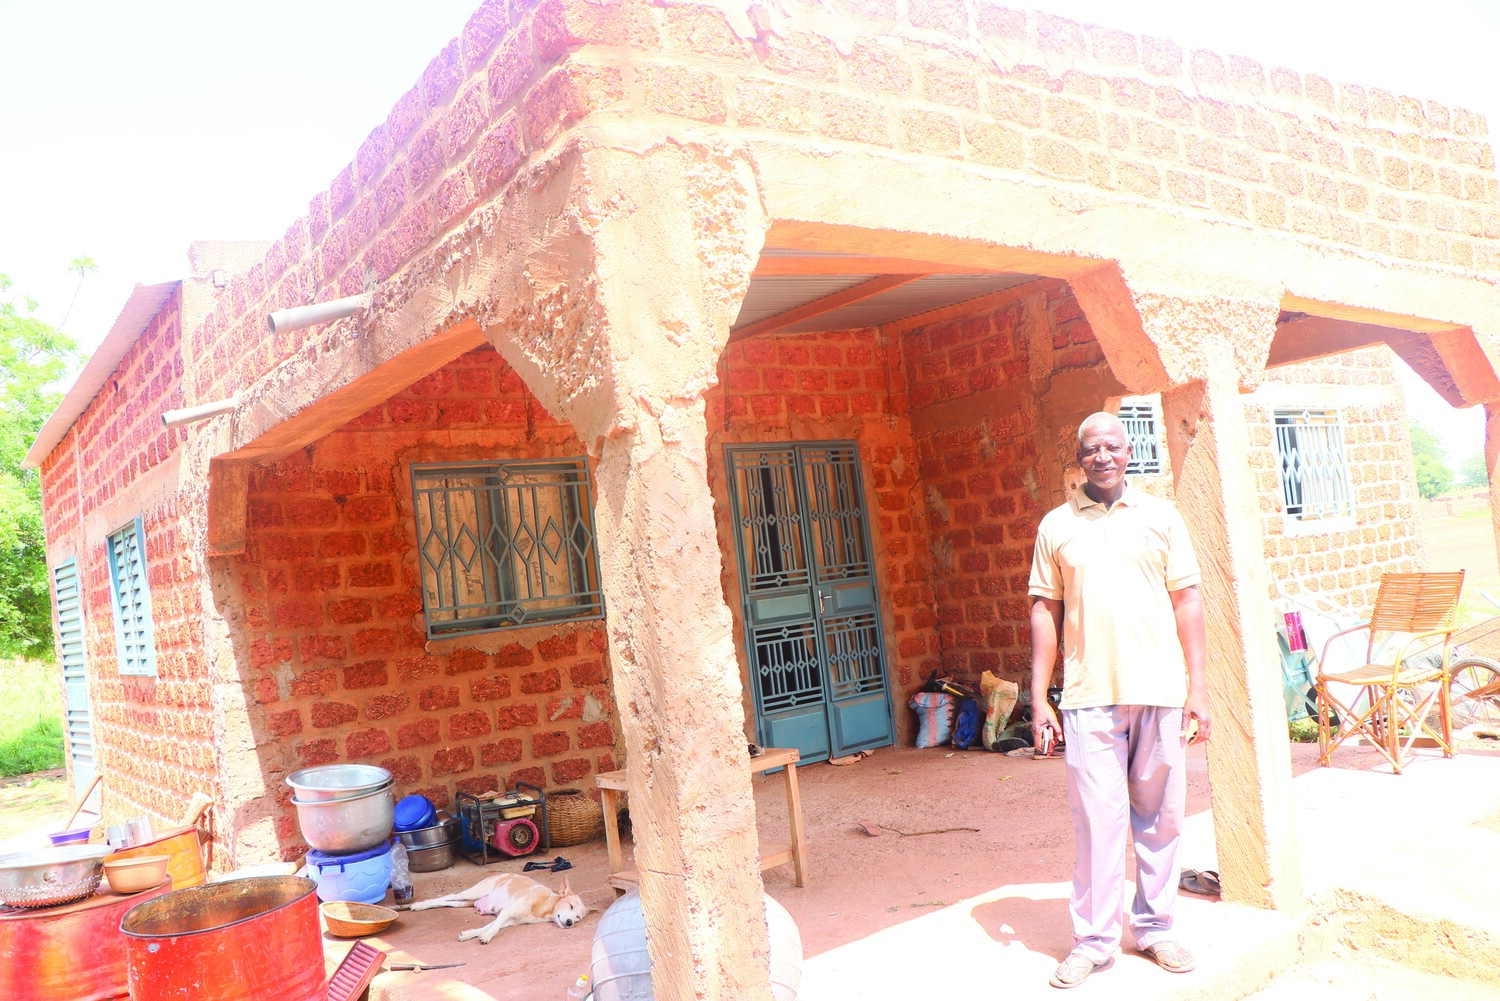 Joël stands in front of his new brick house built with his increased income.